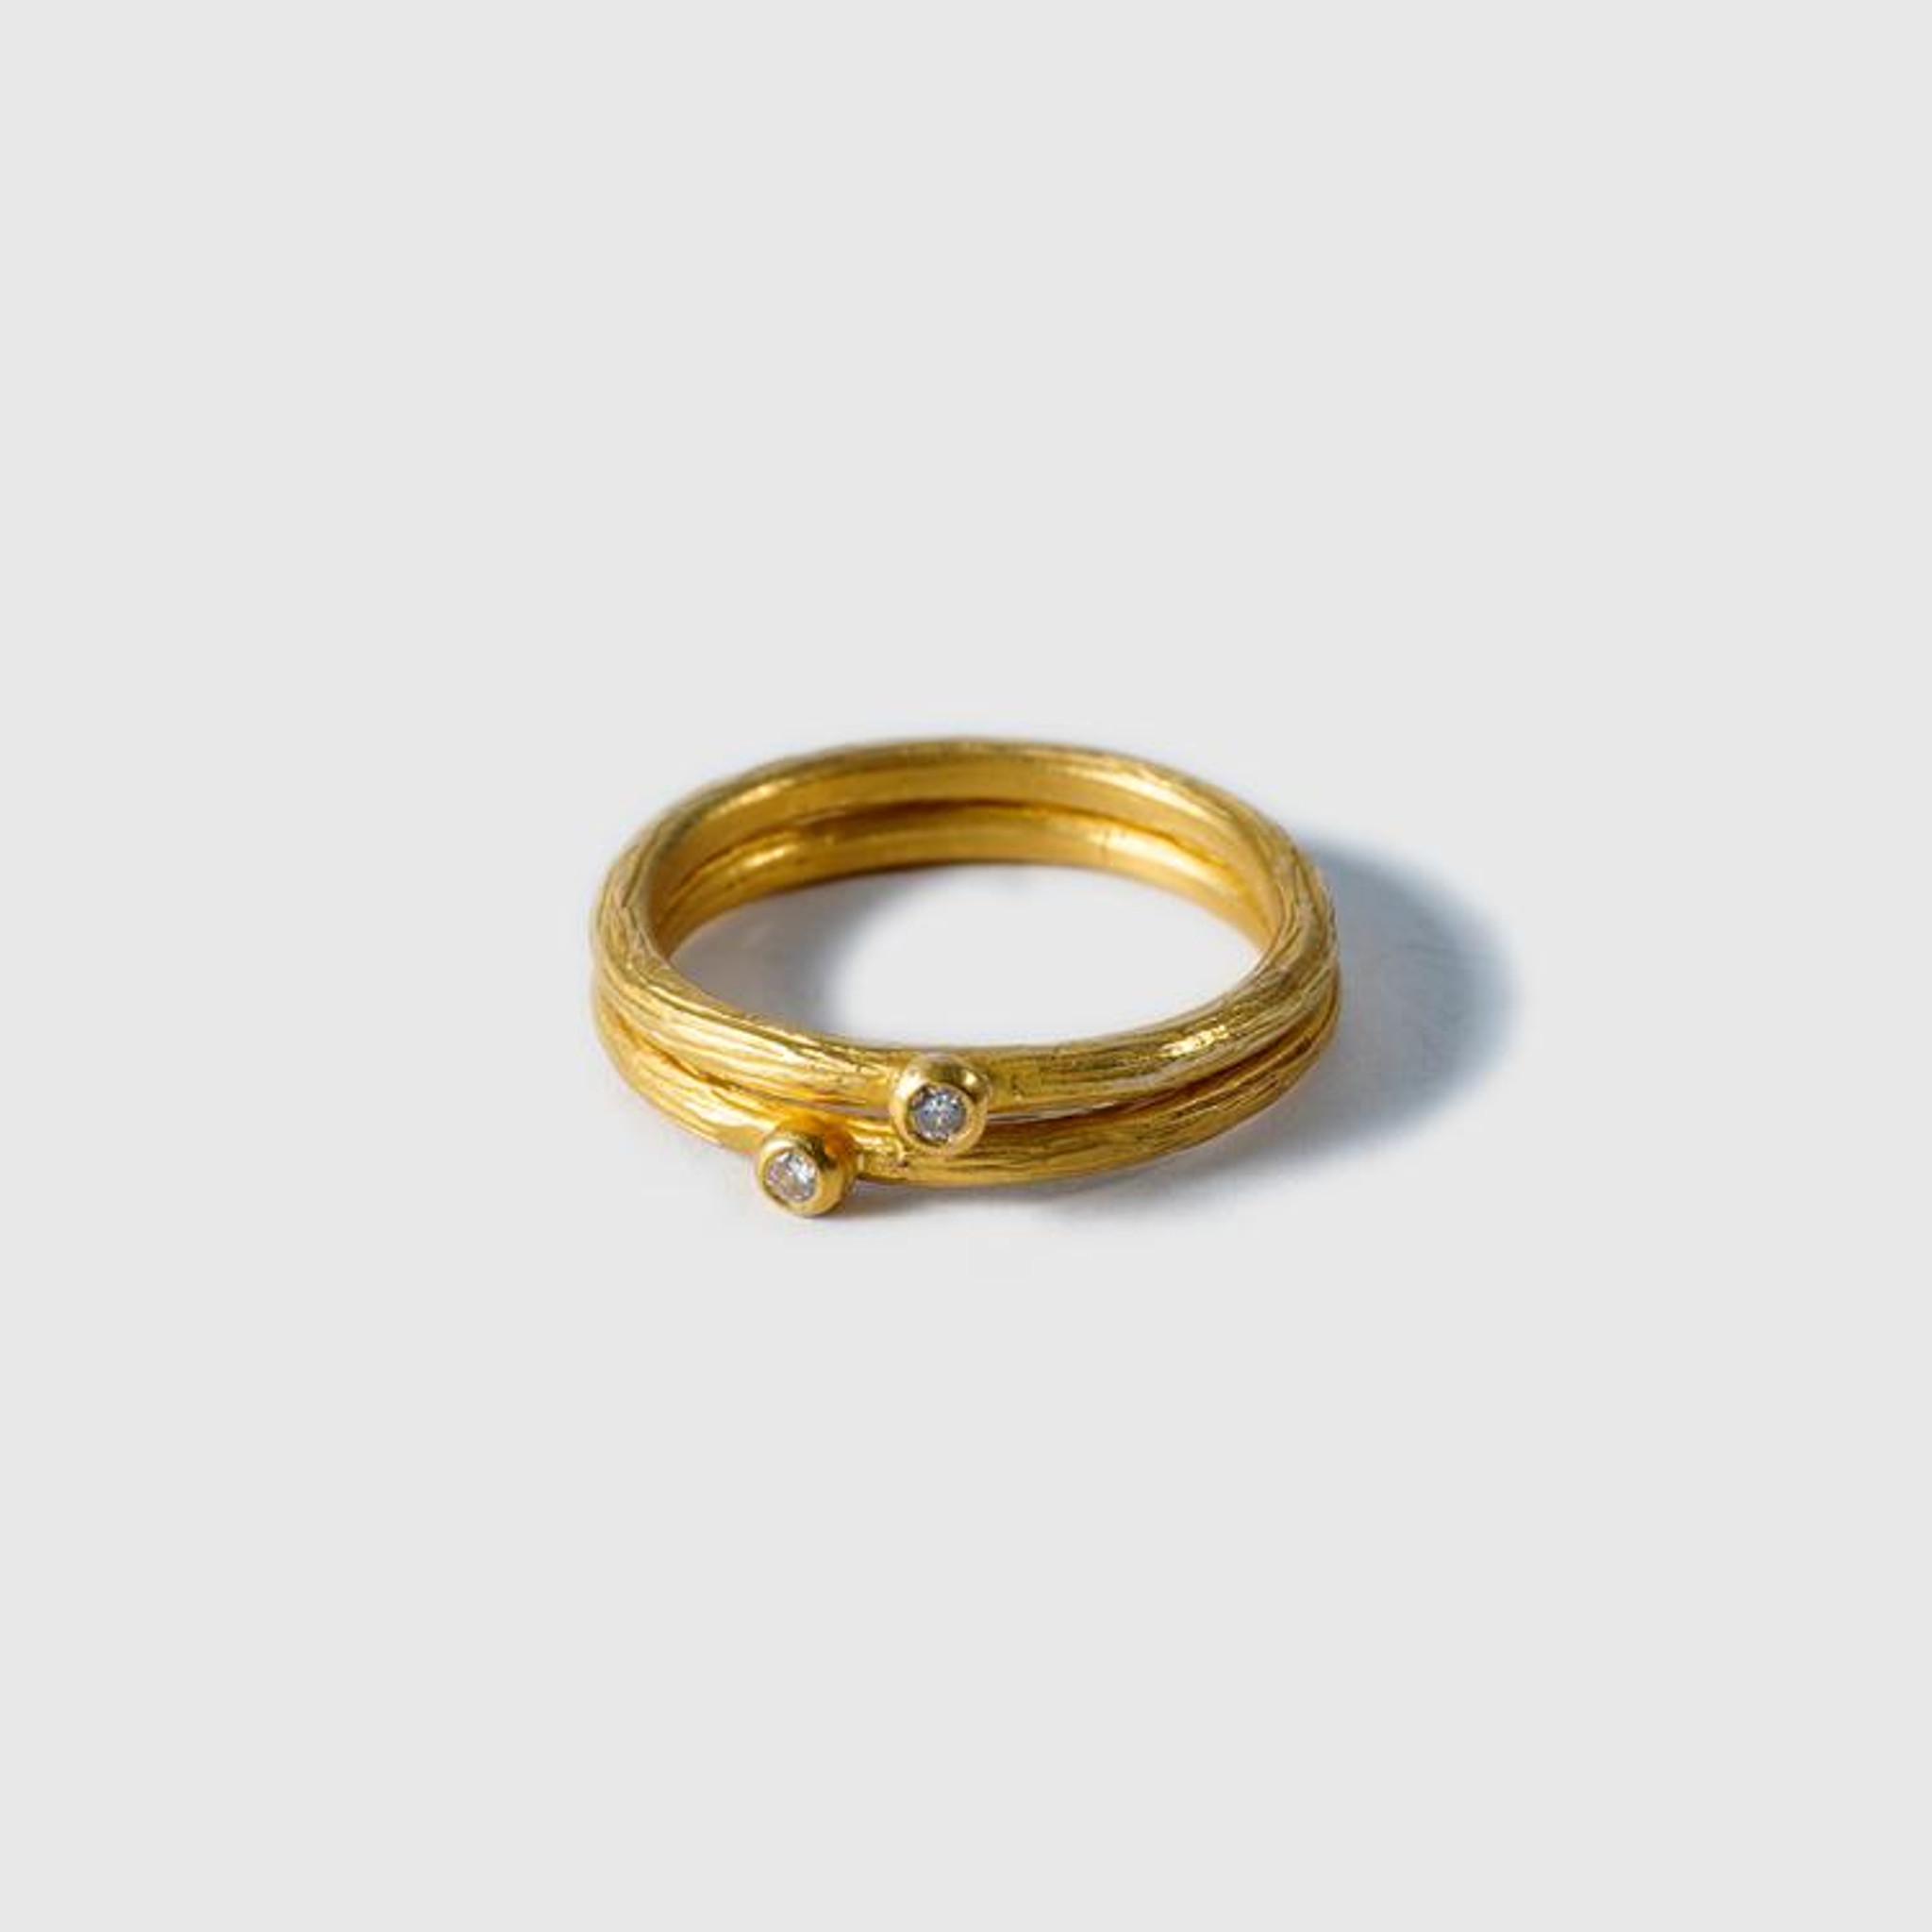 Prehistoric Works 24K Solid Gold Textured Stacker Ring with Solitaire Diamond 